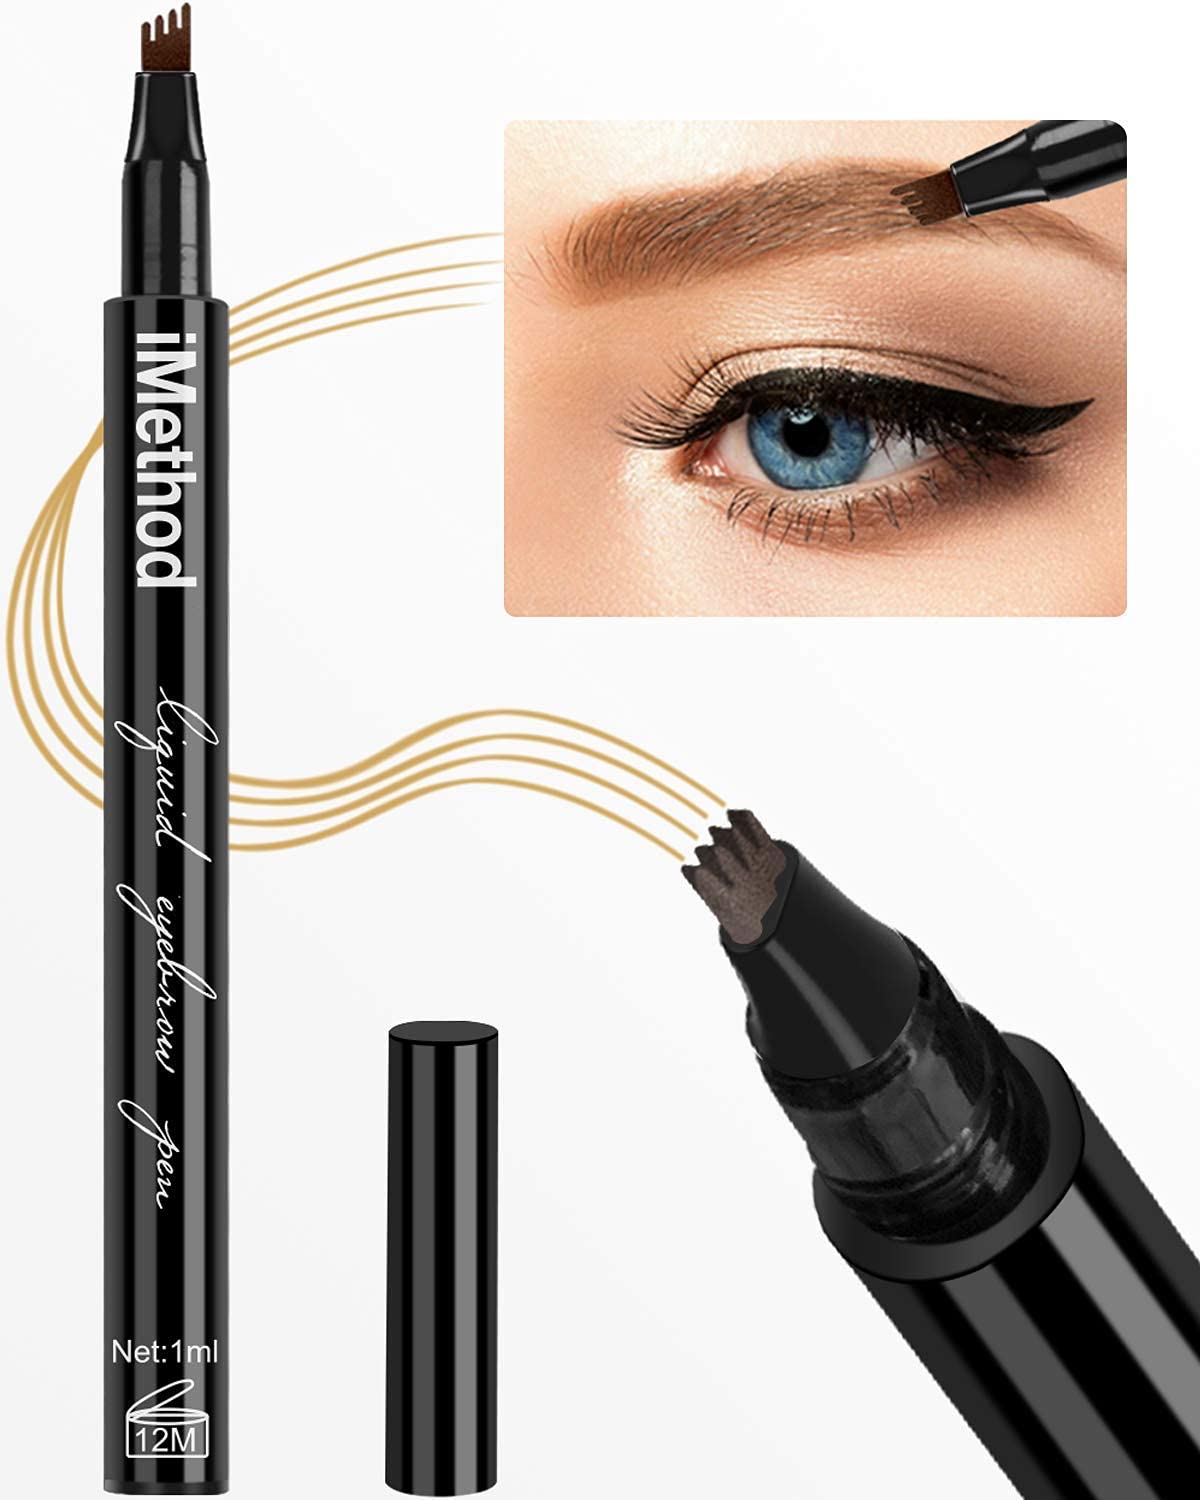 iMethod Eyebrow Pen - iMethod Eye Brown Makeup, Eyebrow Pencil with a Micro-Fork Tip Applicator Creates Natural Looking Brows Effortlessly and Stays on All Day, Dark Brown